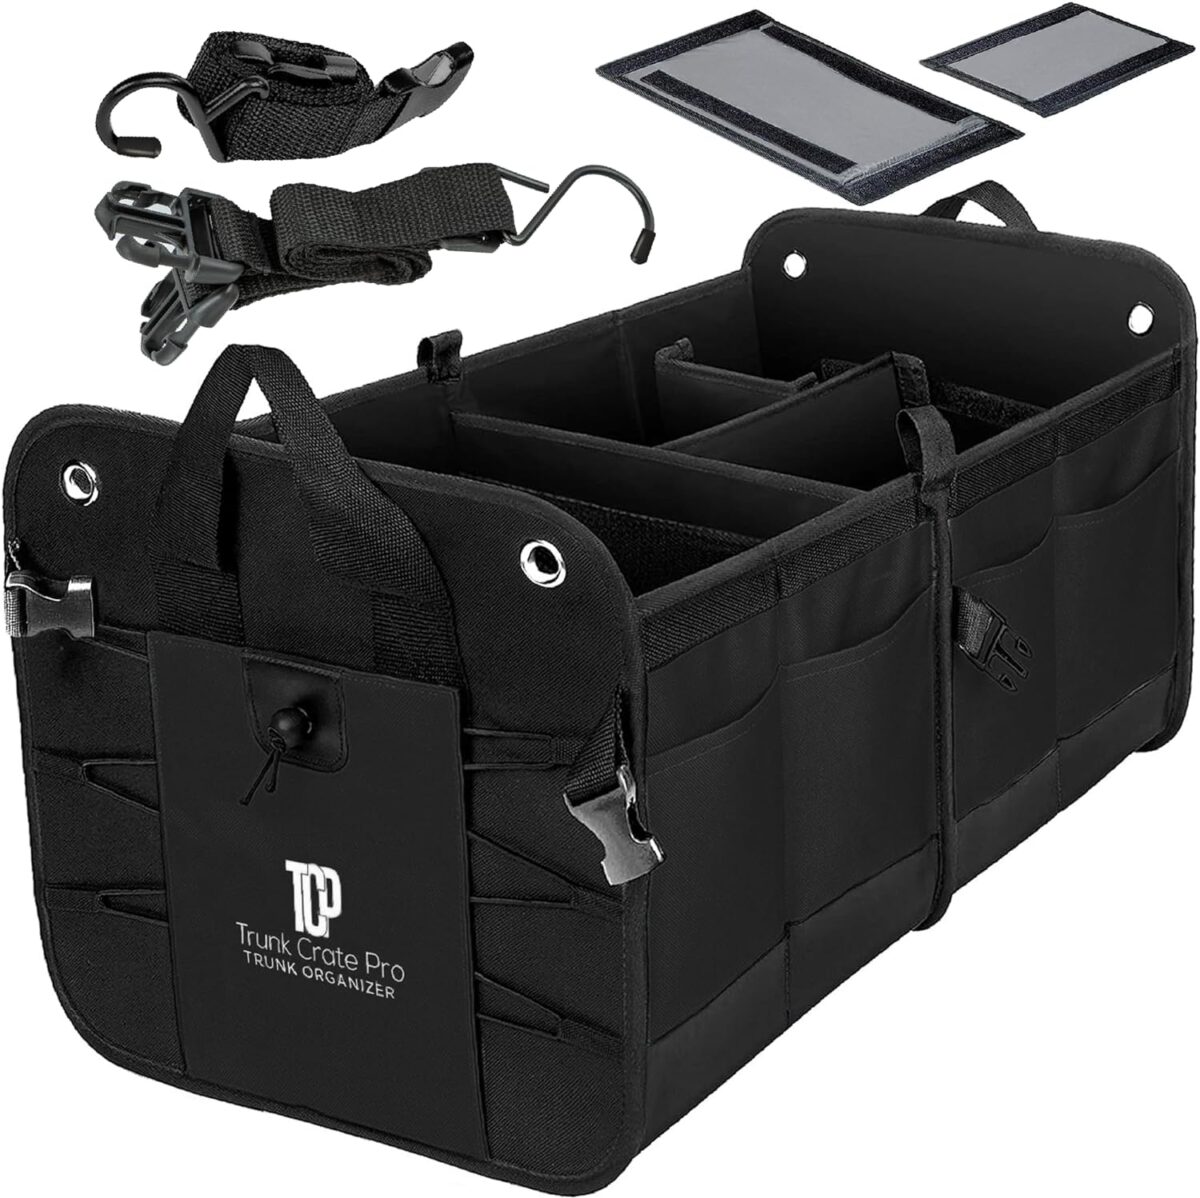 A black car trunk organizer featuring a tablet and phone, perfect for Cyber Monday deals.